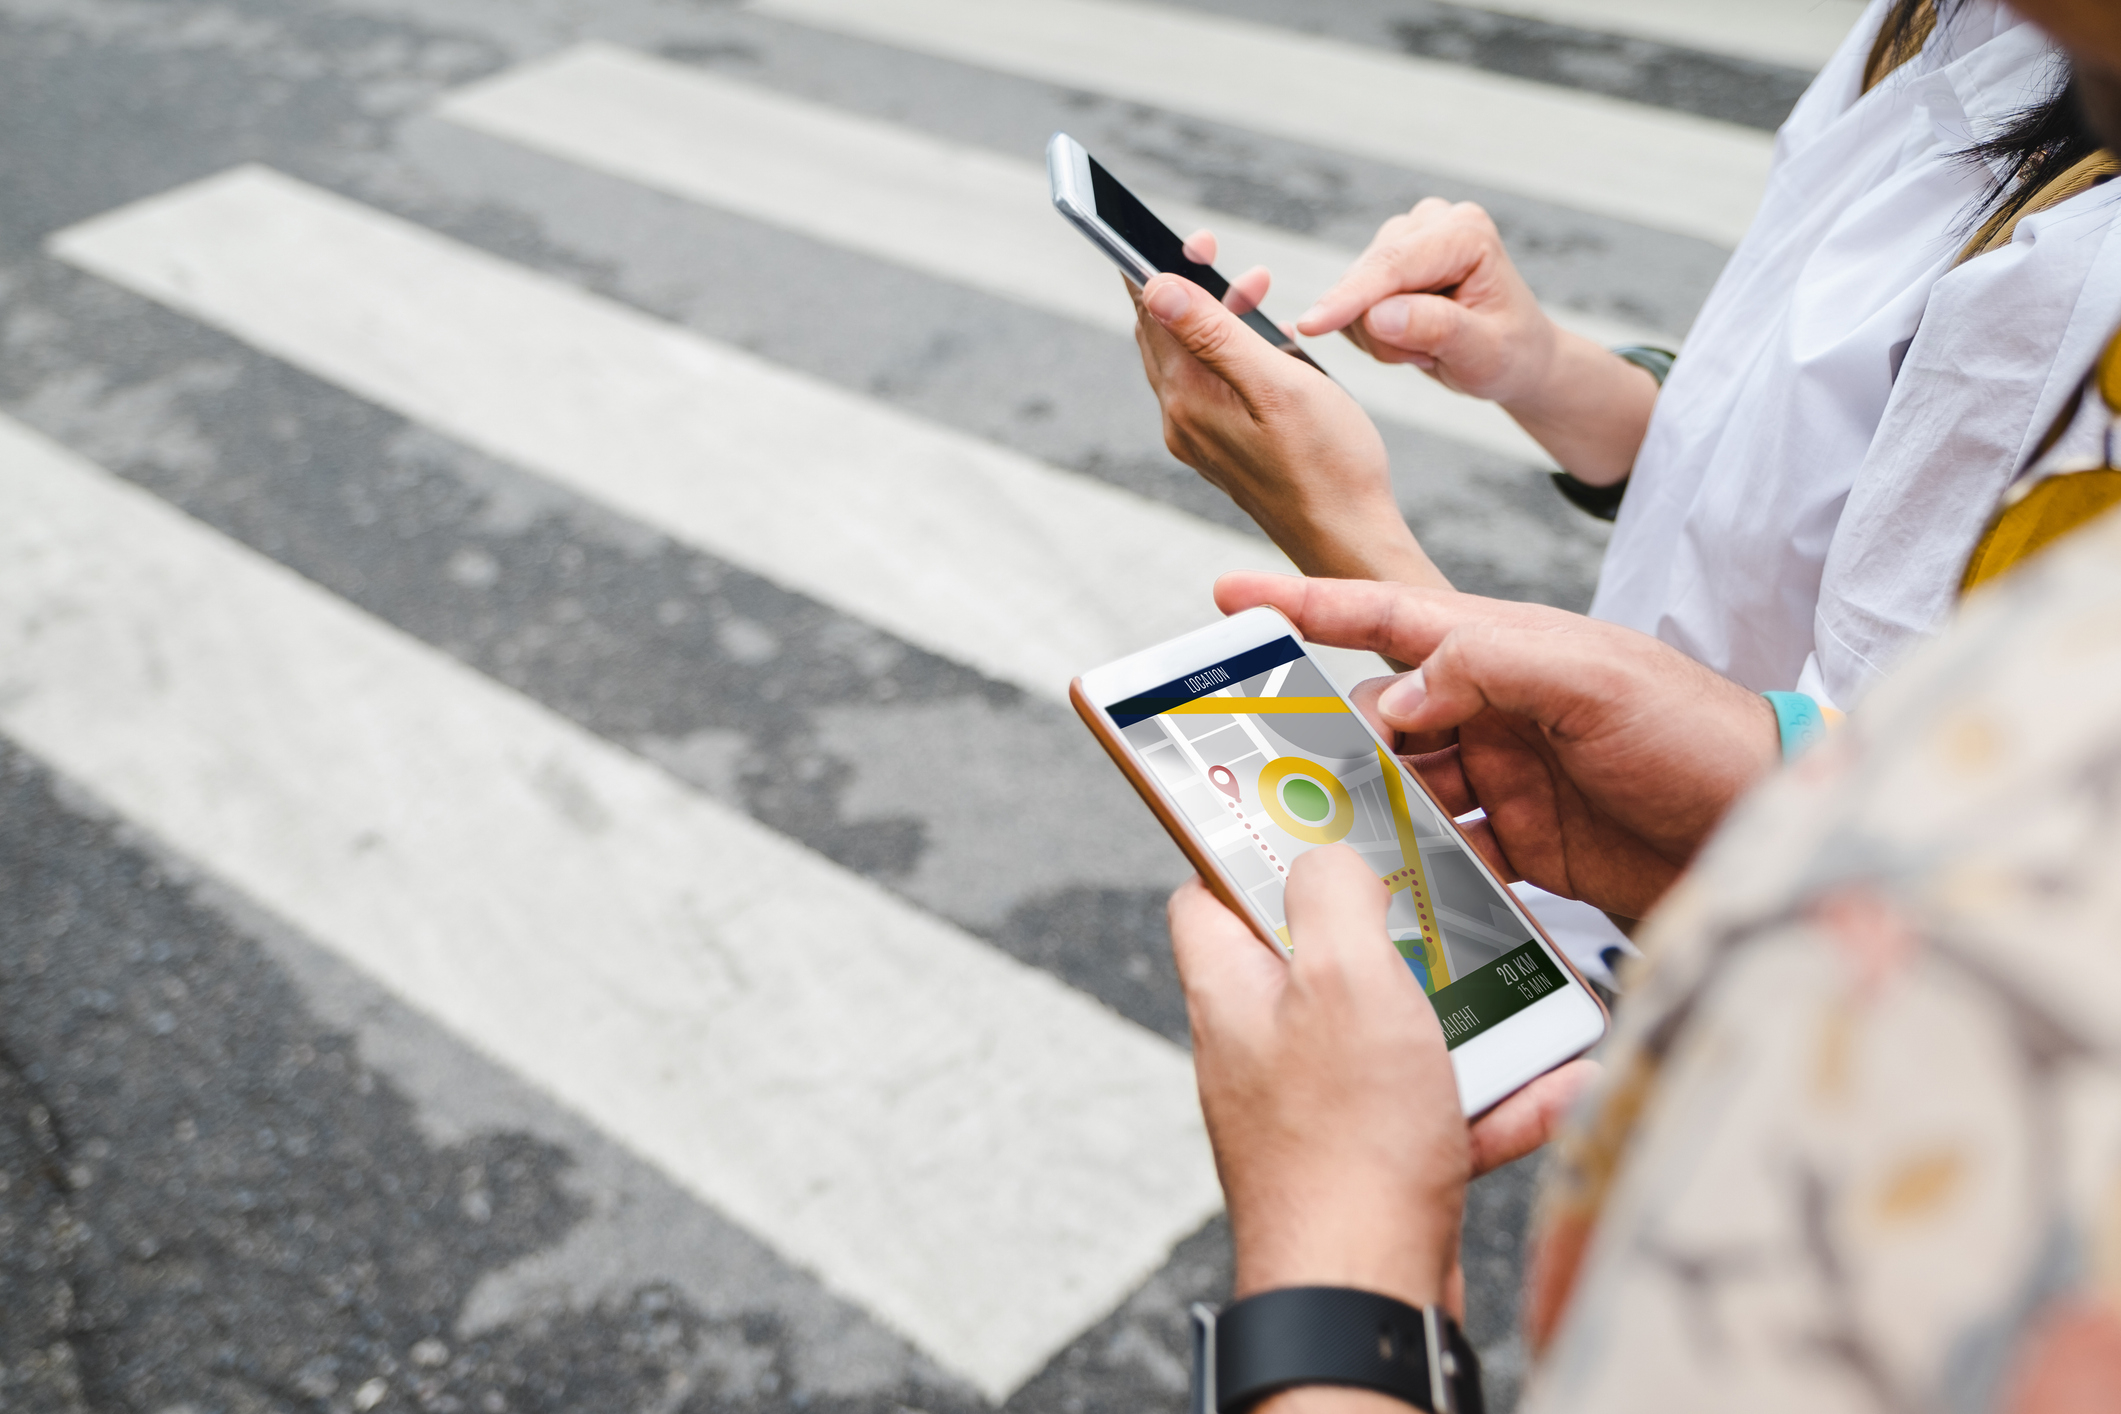 Three people using smartphones while crossing a street with a pedestrian crosswalk. One phone displays a map application